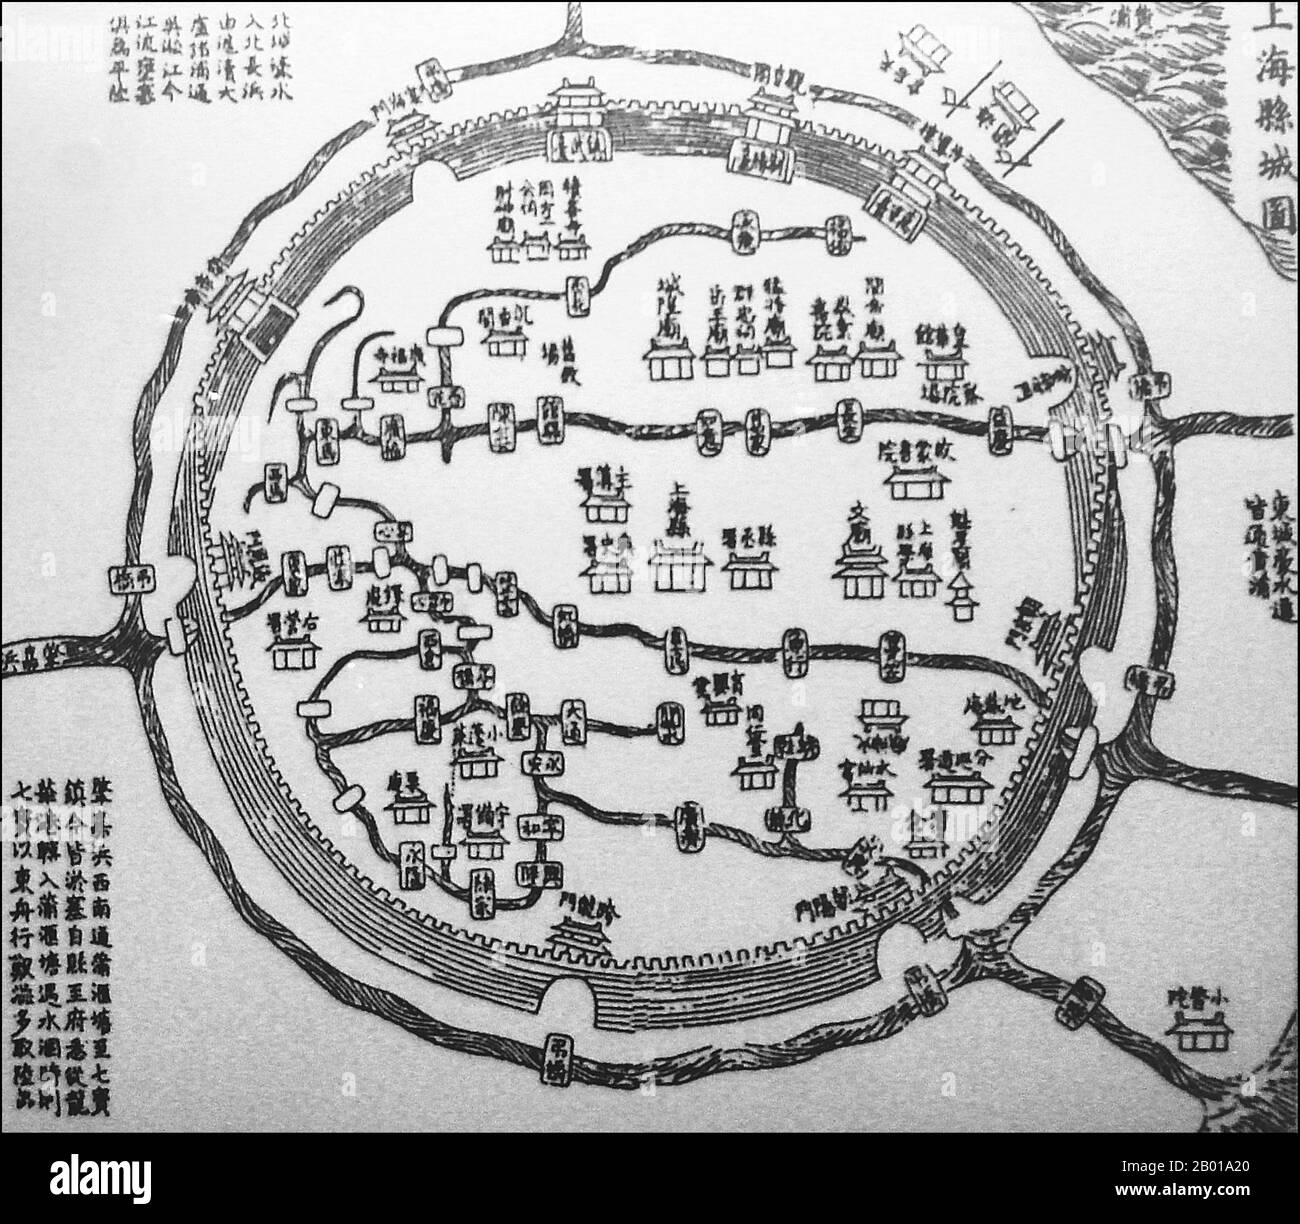 China city map Black and White Stock Photos & Images - Alamy